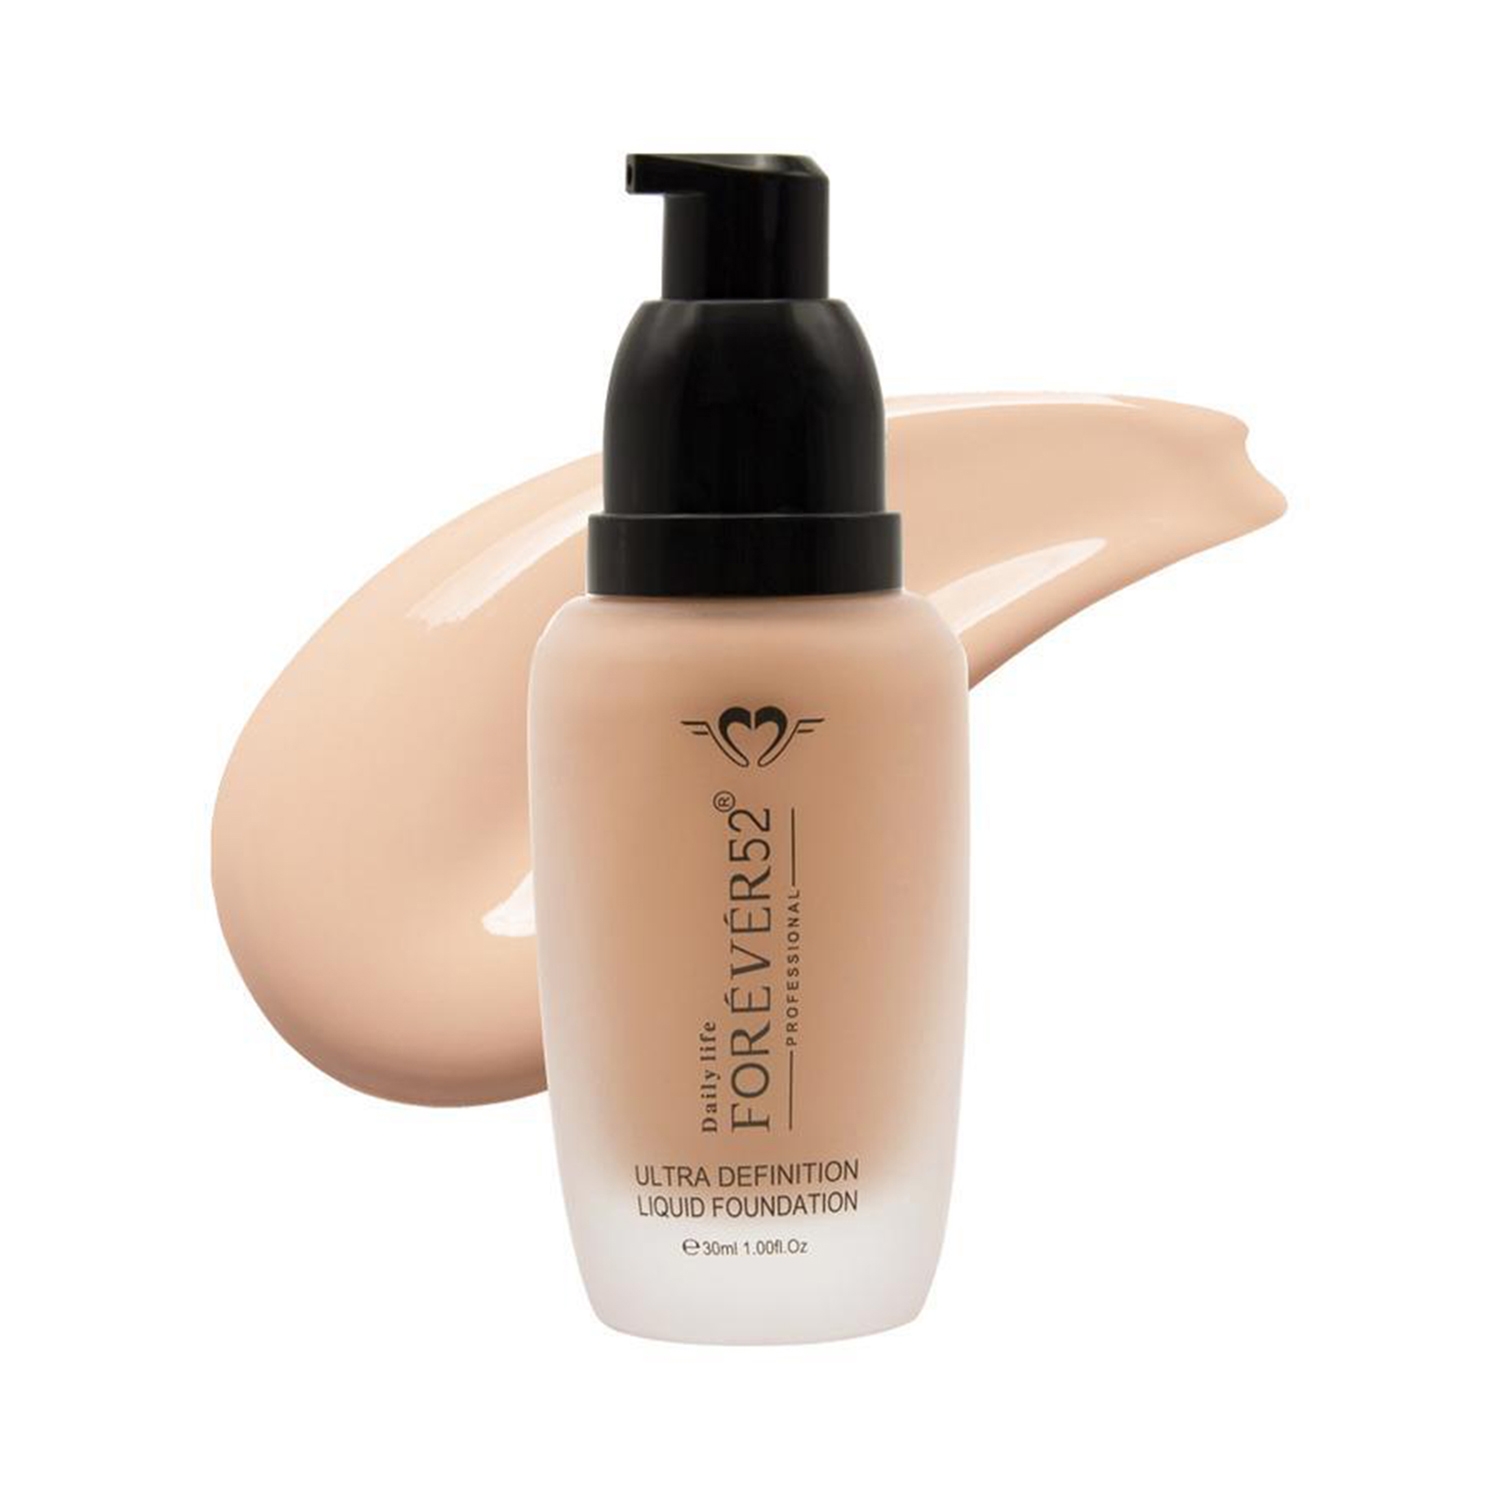 Daily Life Forever52 | Daily Life Forever52 Ultra Definition Liquid Foundation FLF012 - Custard (30ml)